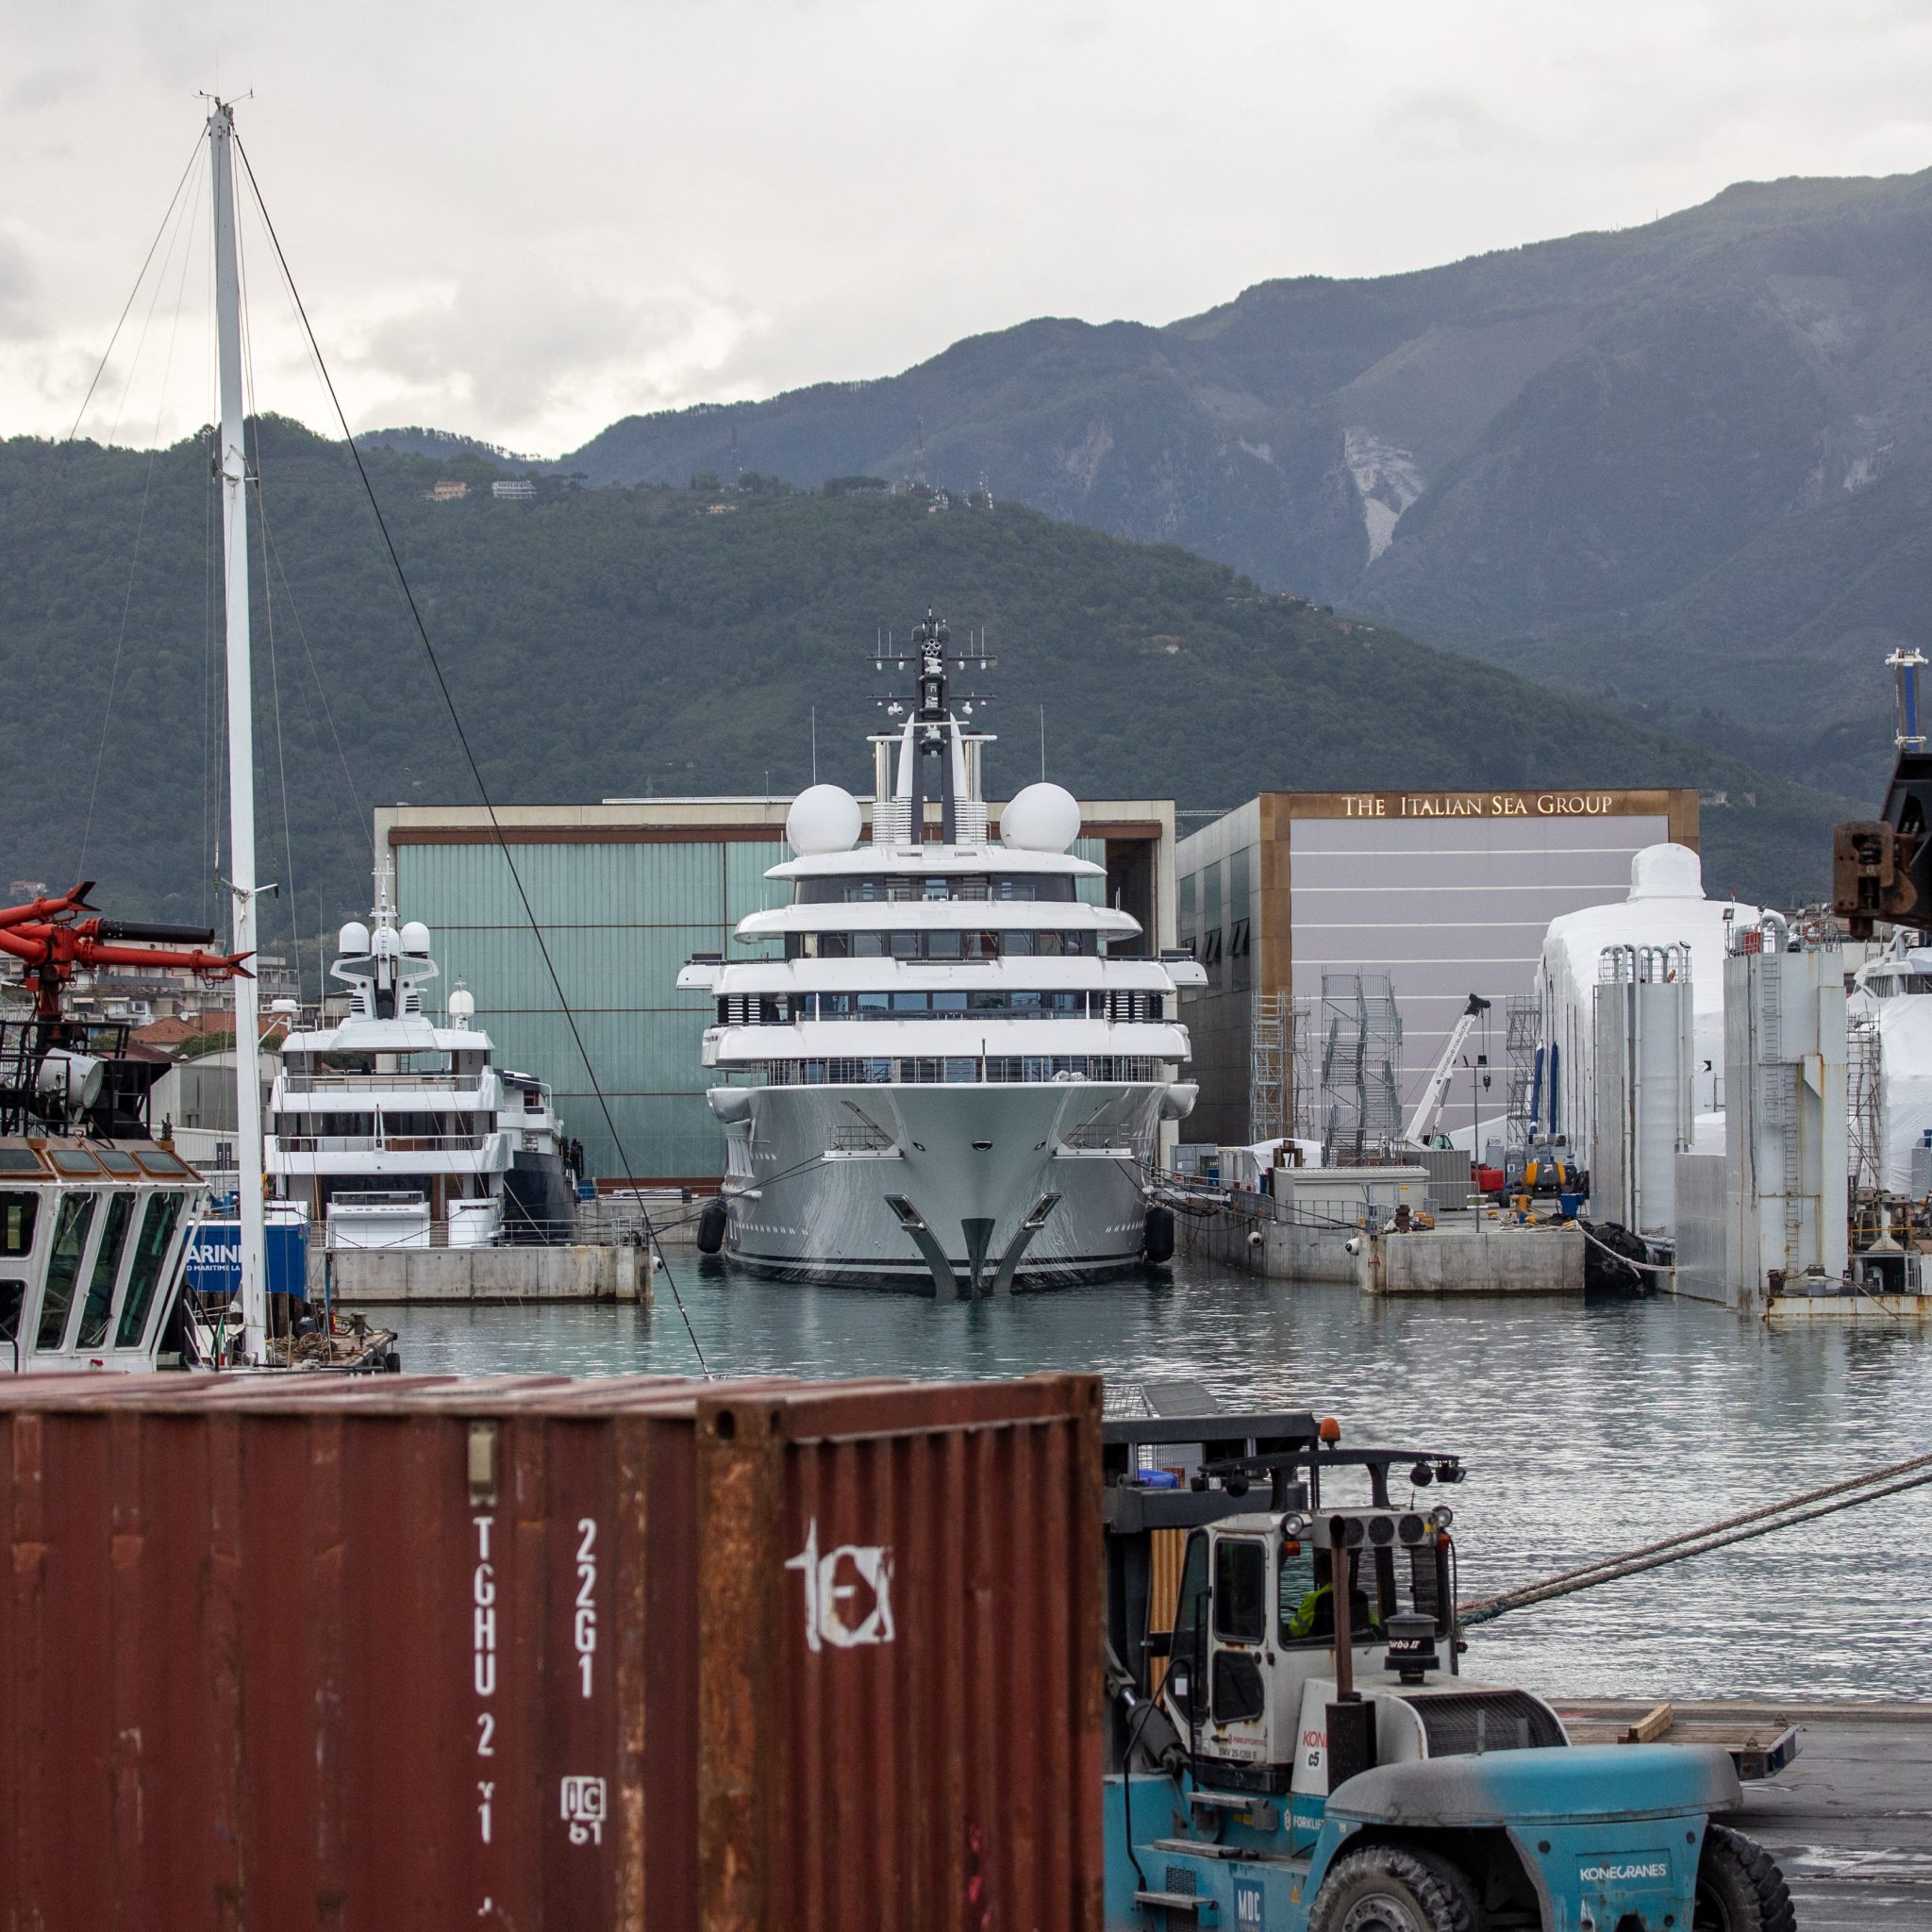 A view shows the multi-million-dollar mega yacht Scheherazade, docked at the Tuscan port of Marina di Carrara, Tuscany, on May 6, 2022, after its basin was reflooded.  The ownership of the multi-million-dollar mega yacht Scheherazade, docked on the Tuscan coast, is currently the source of speculation that it belongs to a Russian oligarch, or even perhaps President Vladimir Putin himself.
Federico SCOPPA / AFP